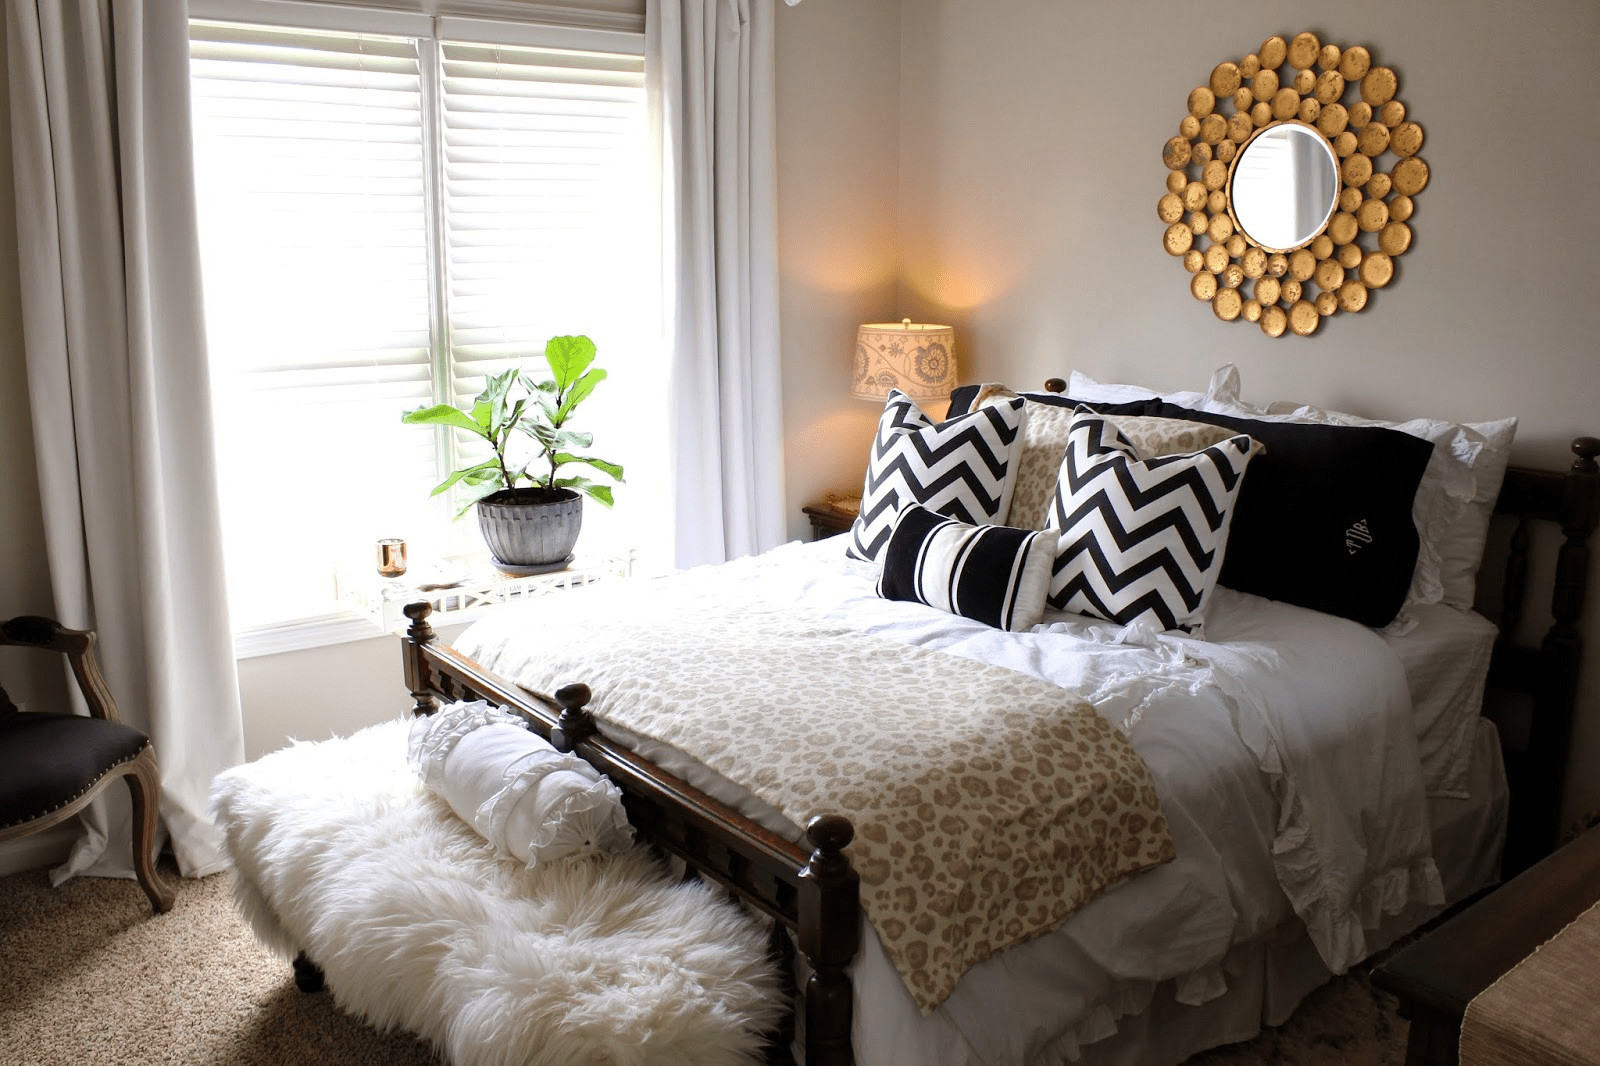 Small Guest Bedroom Ideas
 How to Decorate Guest Bedroom Your Own